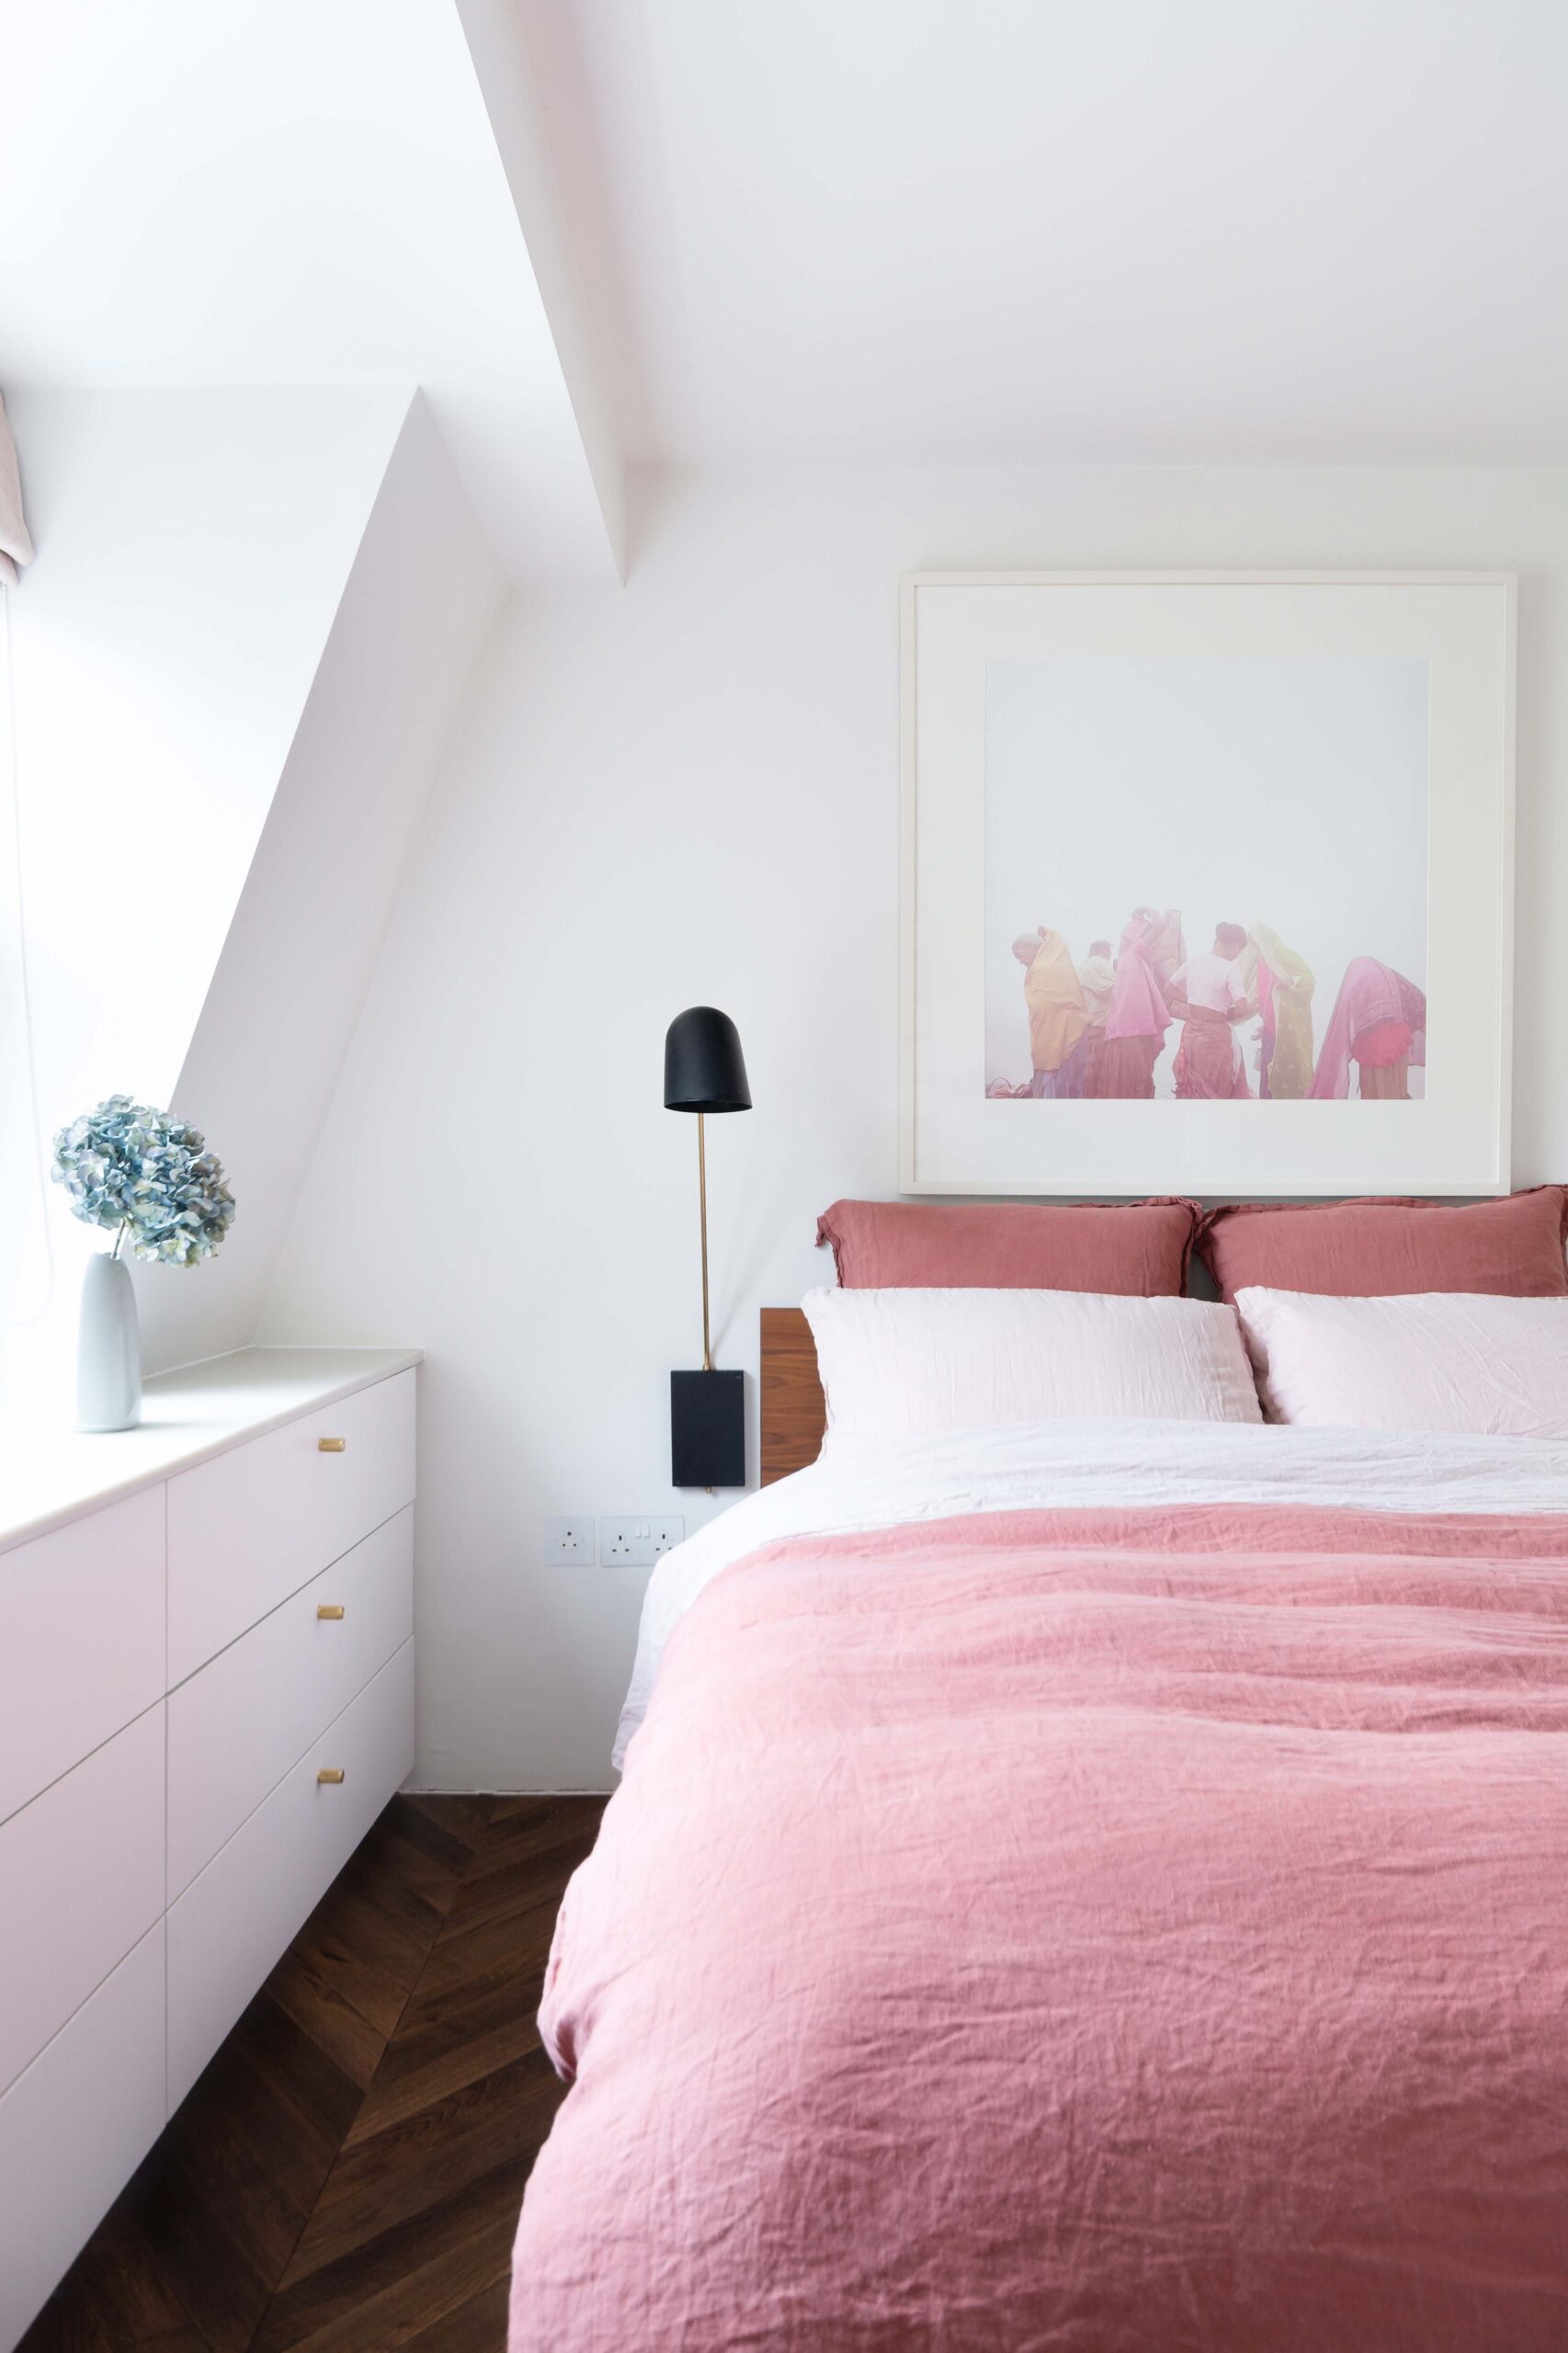 Luxury property for sale in Notting Hill W11 - Alba Place - modern bedroom with pink bedding